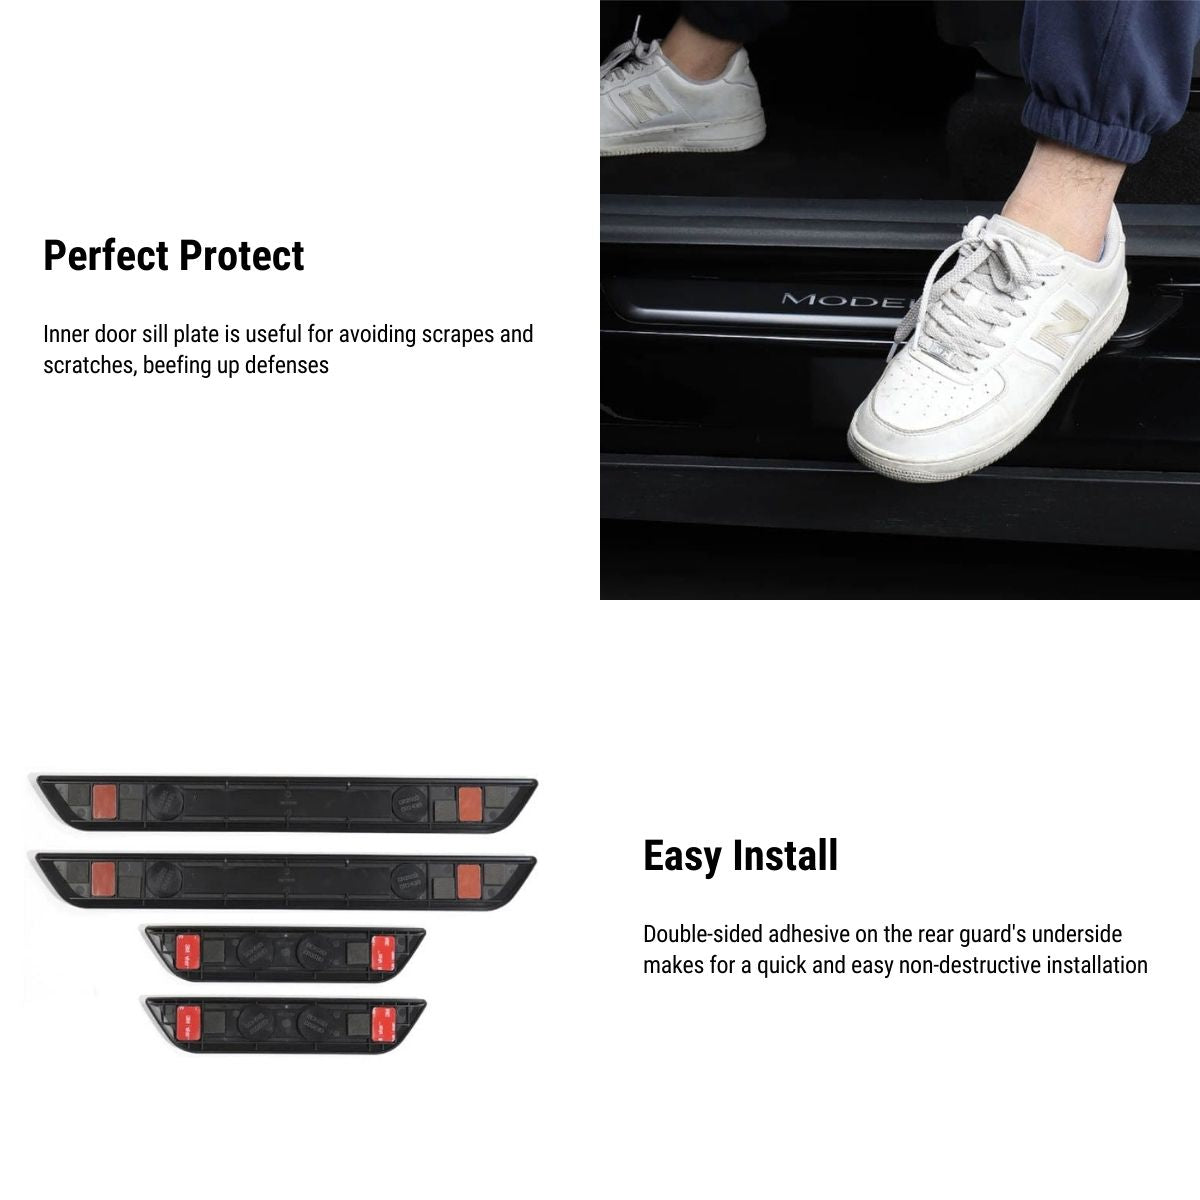 Model 3/Y LED illuminated Welcome Pedal Door Sill Protector